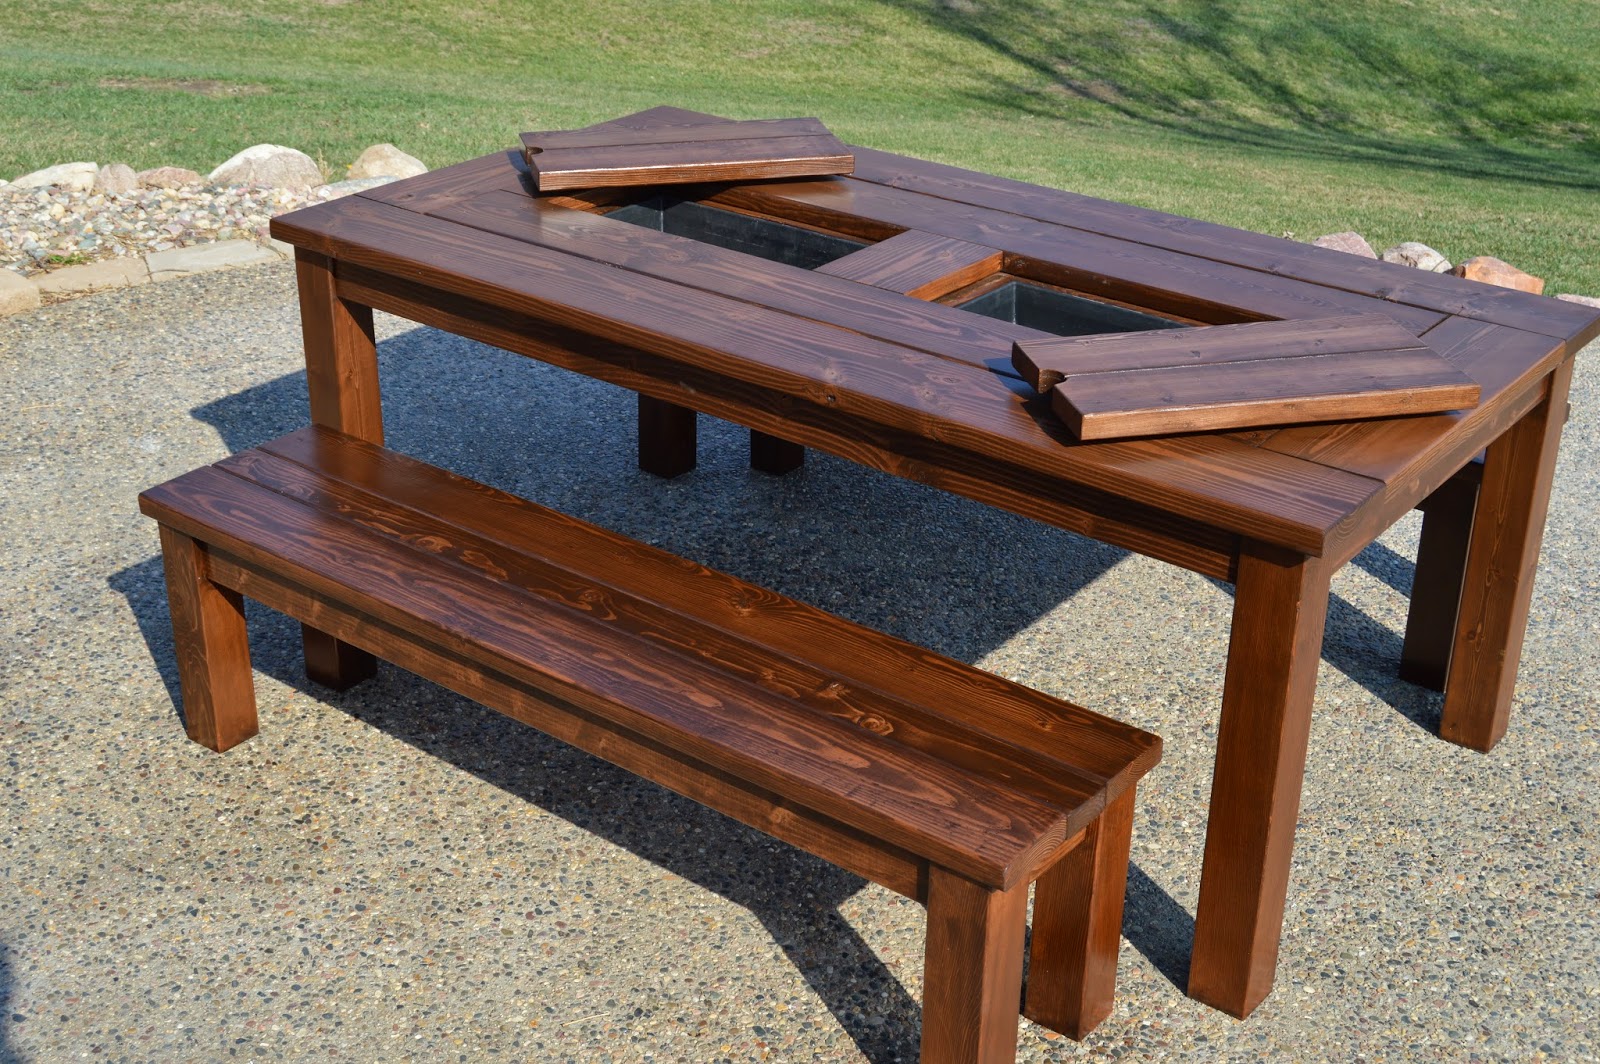 KRUSE'S WORKSHOP: Step by Step Patio Table Plans - With Built-In Coolers!